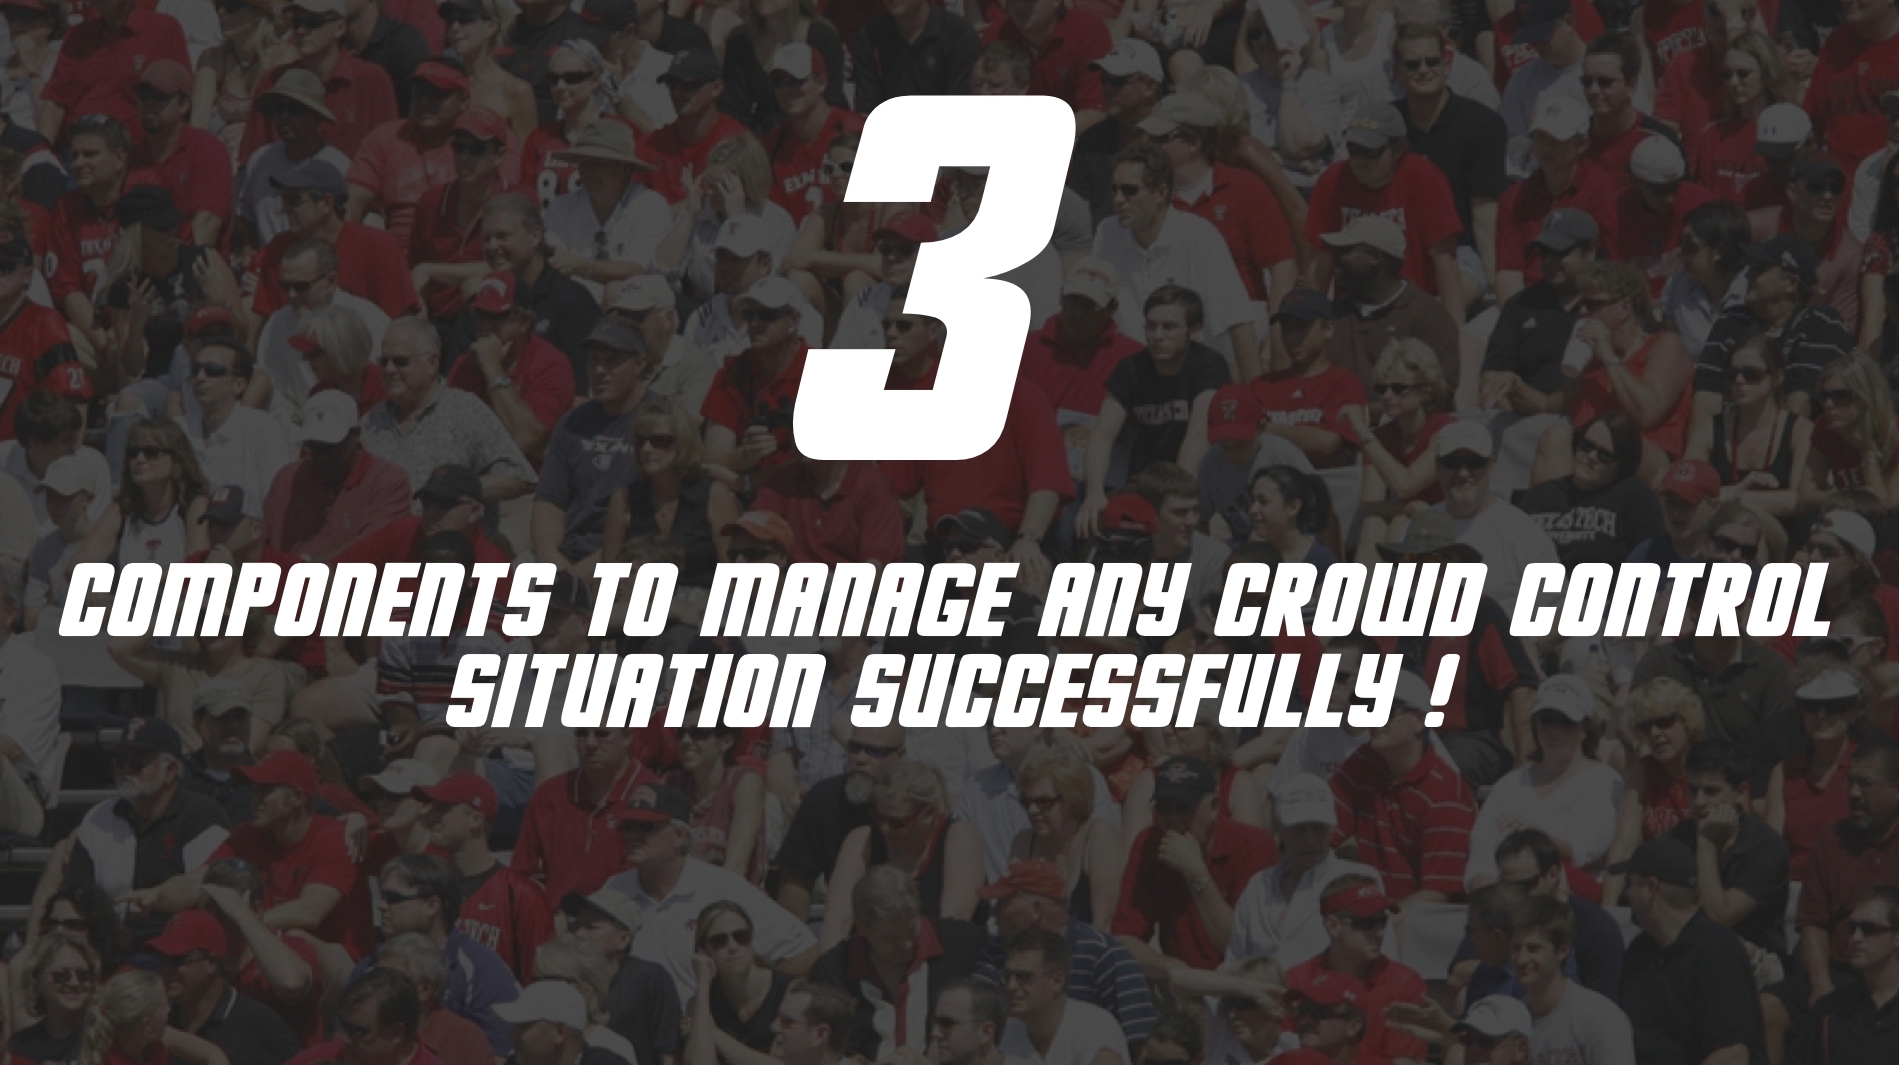 3 Components to Manage any Crowd Control Situation Successfully!